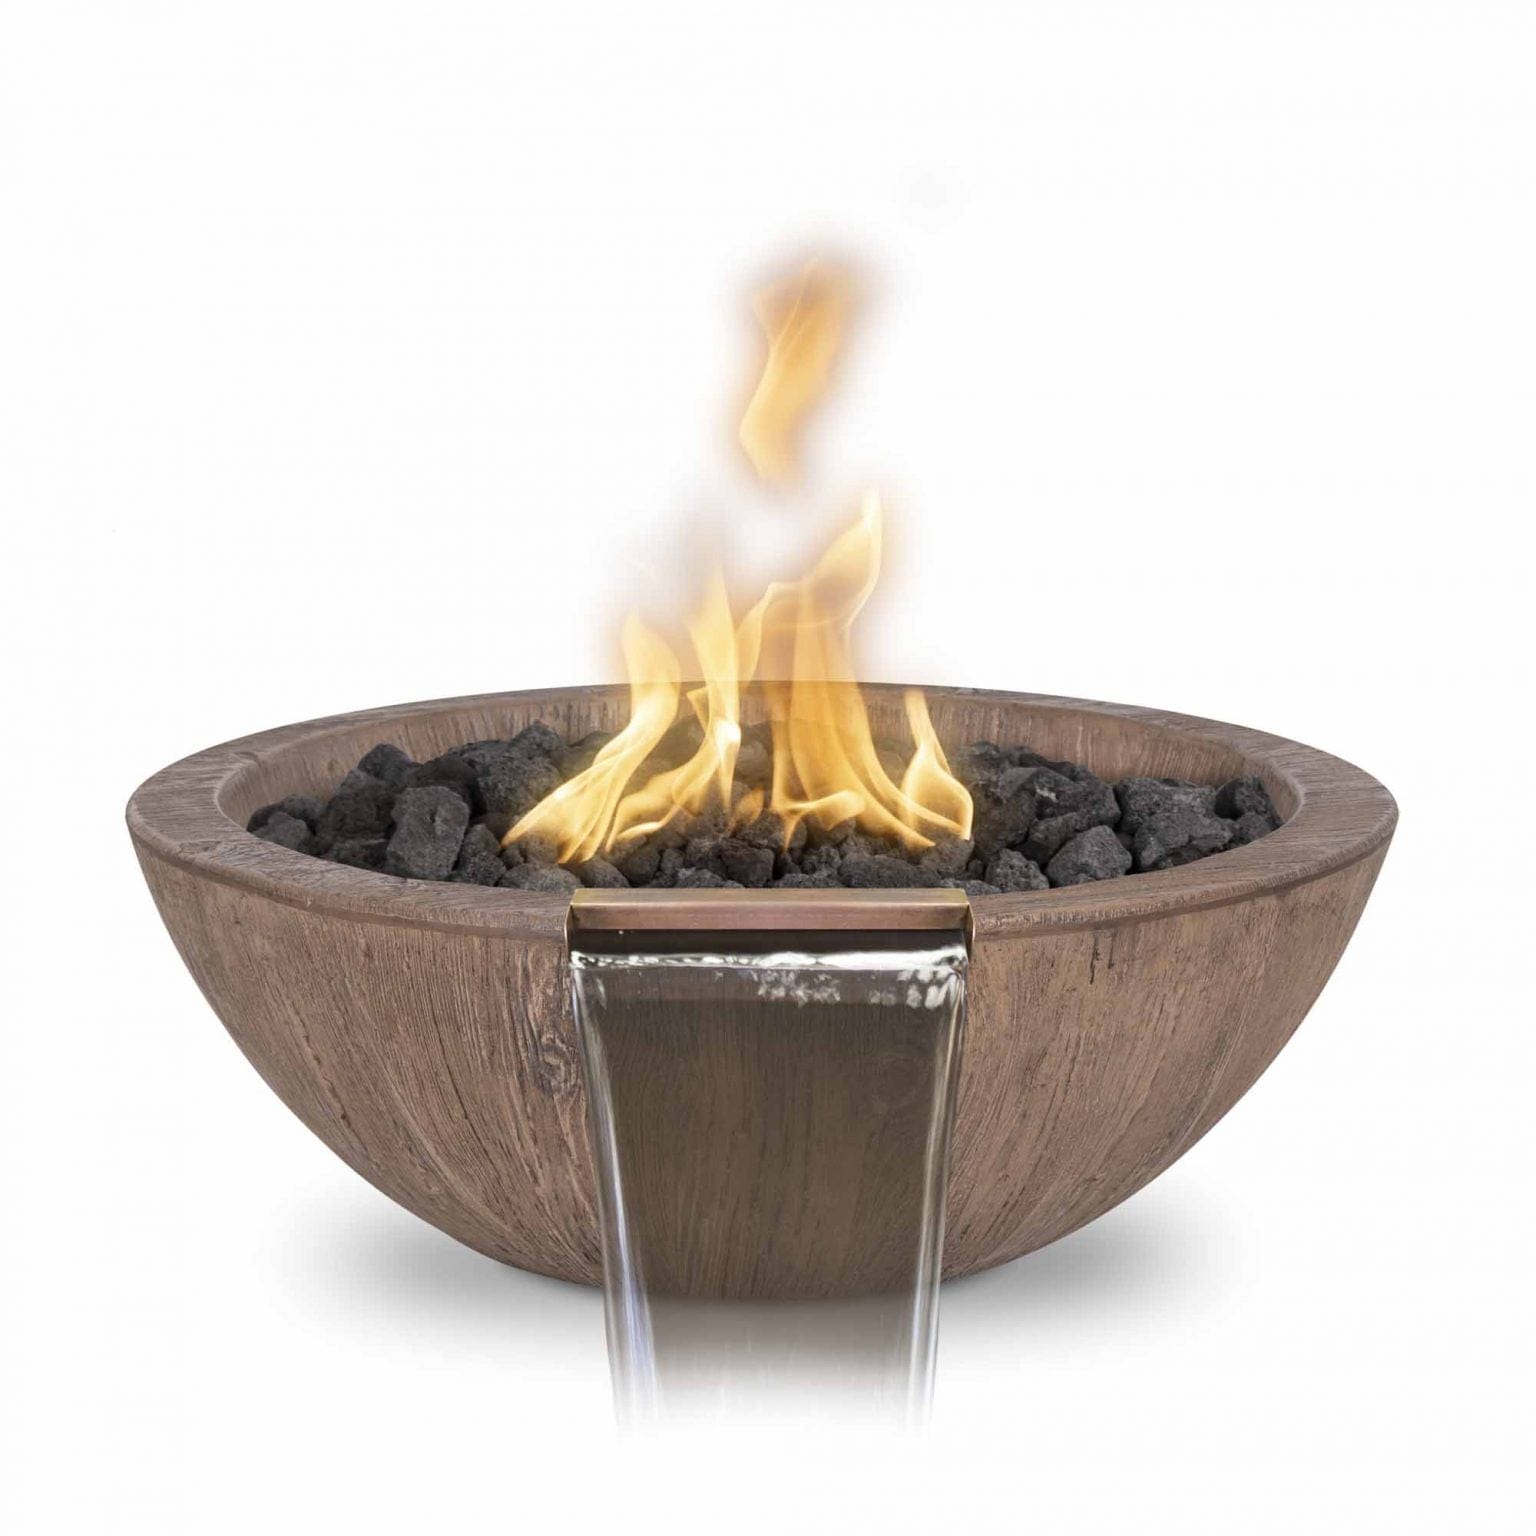 The Outdoor Plus Fire & Water Bowl Low Voltage Electronic Ignition The Outdoor Plus 27" Sedona Fire & Water Bowl | Wood Grain Concrete OPT-27RWGFWE12V